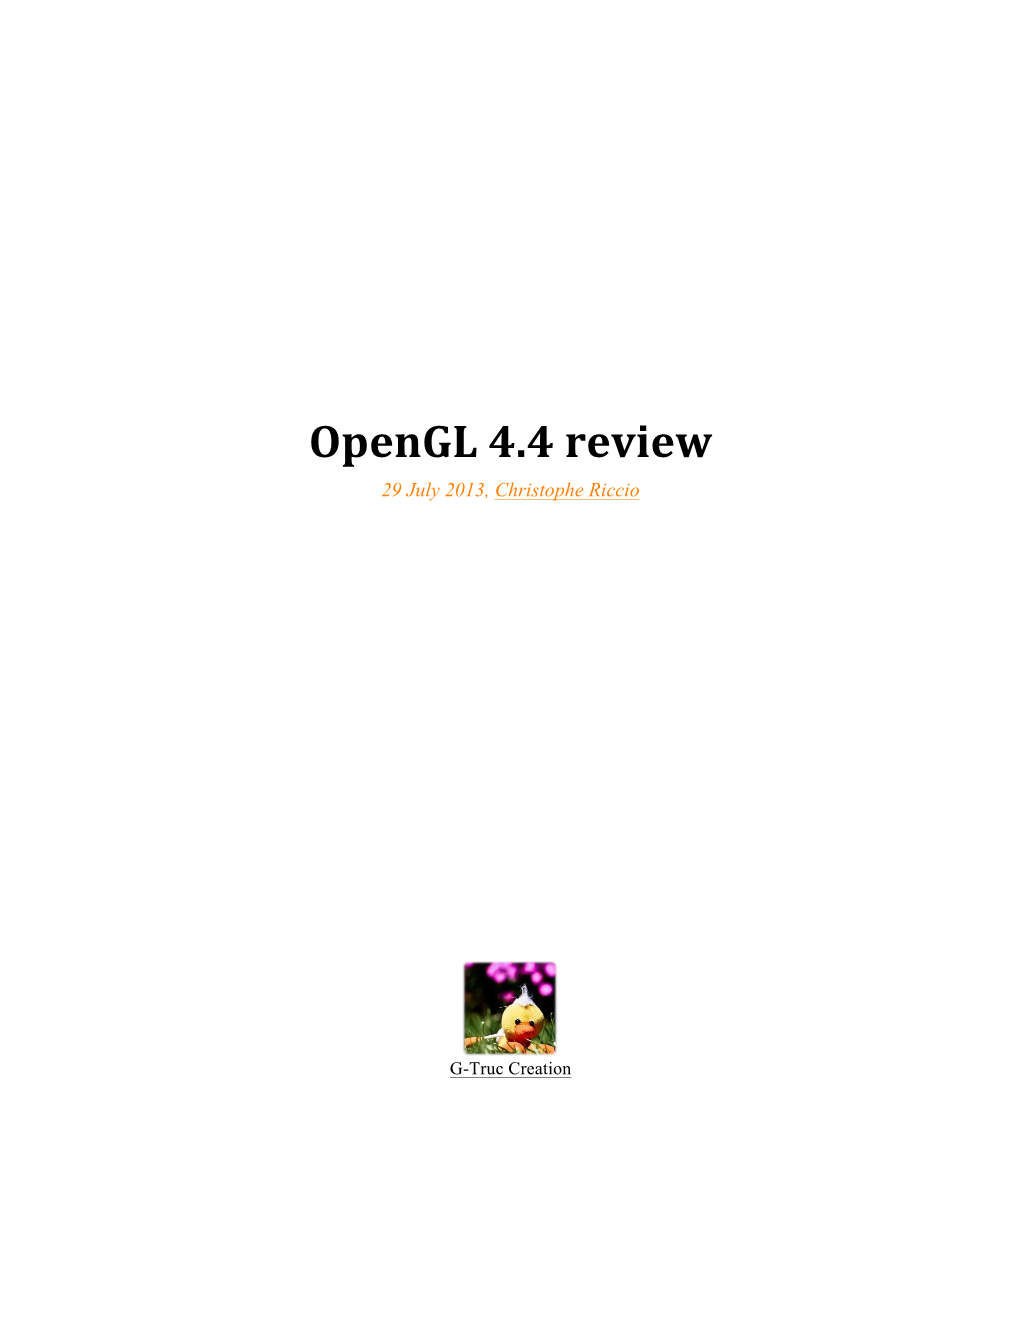 Opengl 4.4 Review 29 July 2013, Christophe Riccio